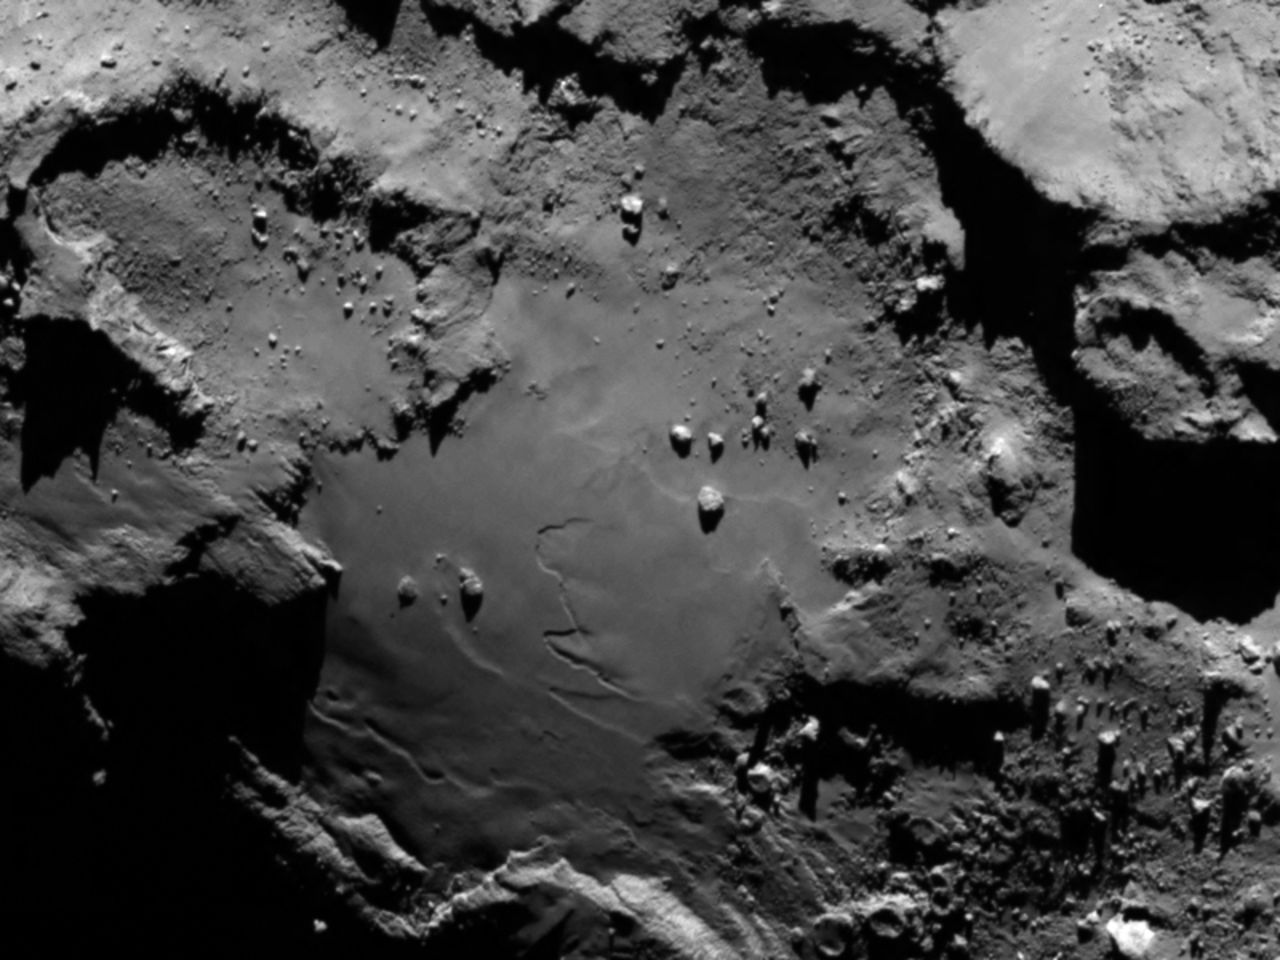 Scientists hope the lander will provide data from surface operations for at least a week, and continue for months as the comet travels toward the Sun. This incredible close up of the comet surface was taken from the Rosetta orbiter upon approach, from a distance of 130km, in early August. The image shows a range of features including boulders, craters and steep cliffs.